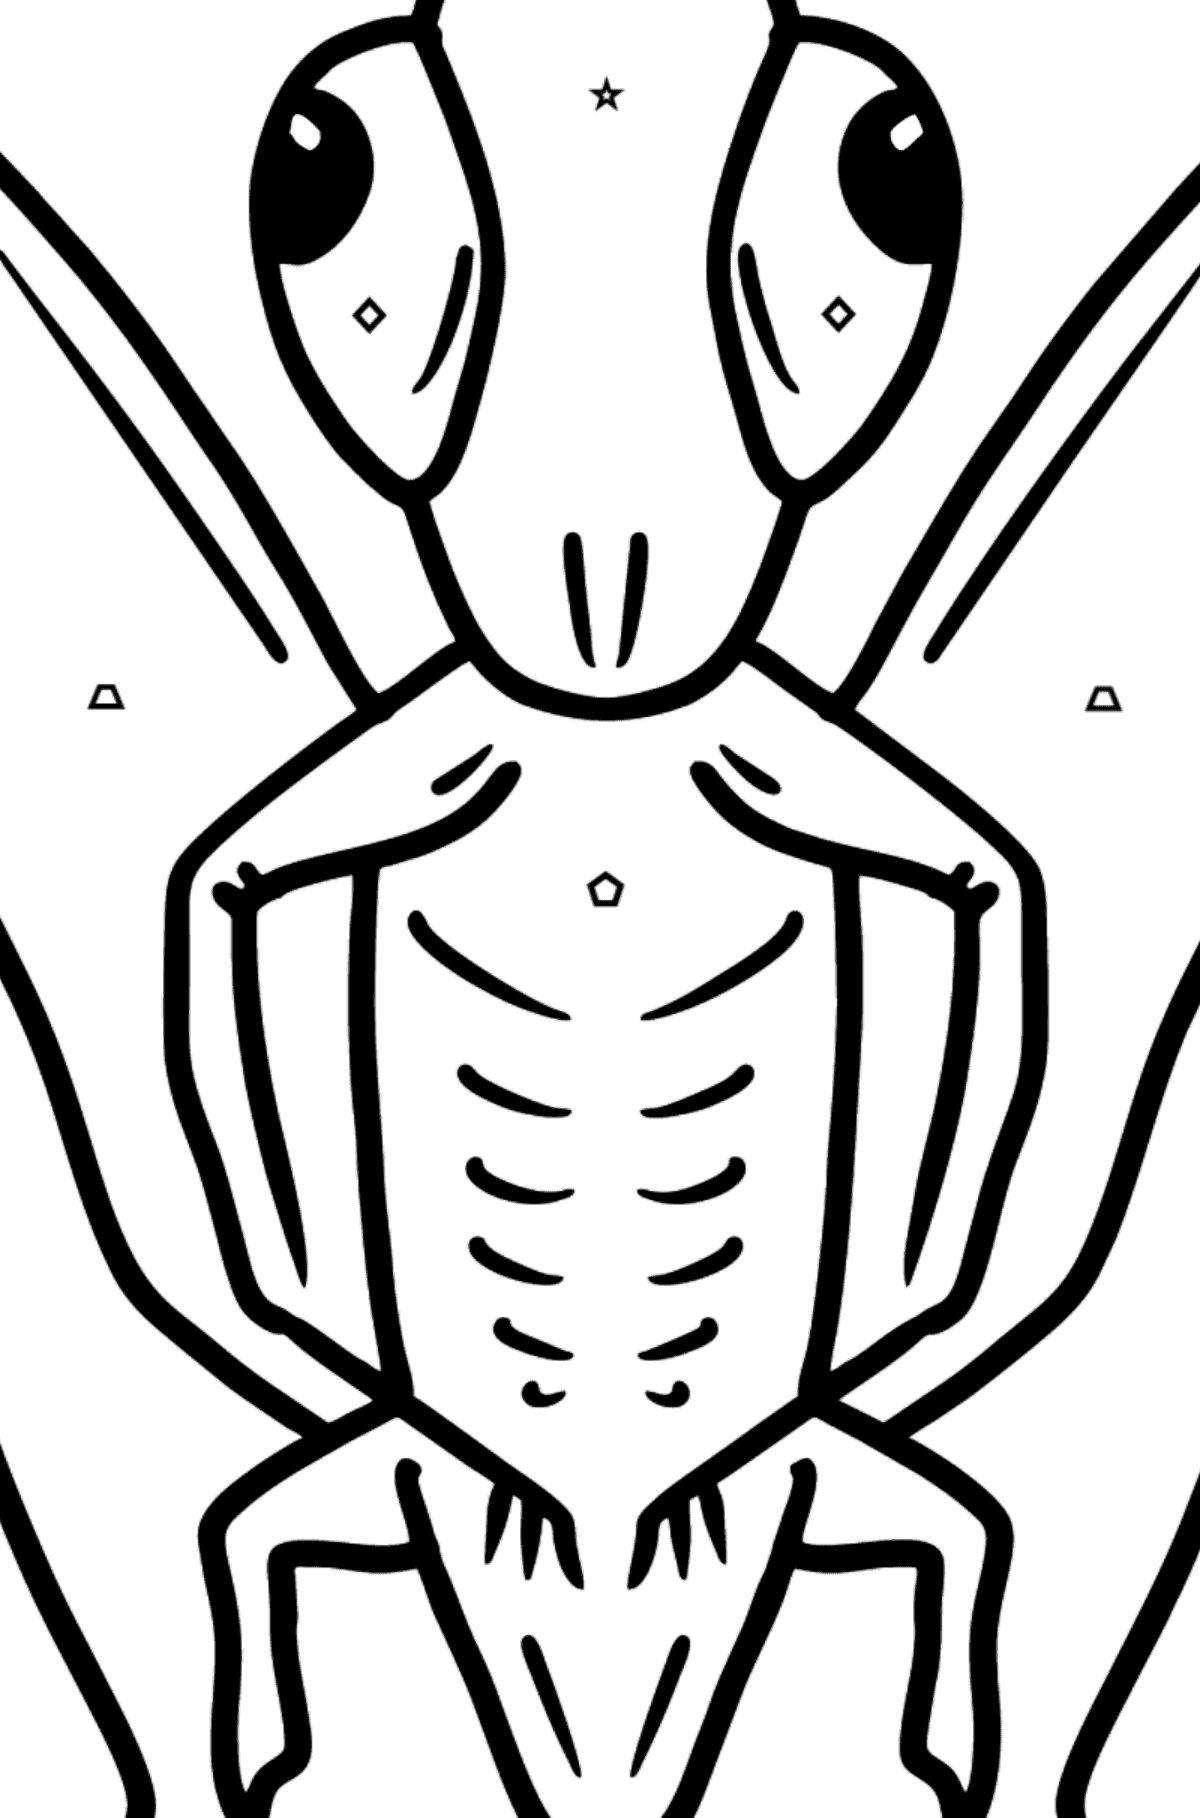 Grasshopper coloring page - Coloring by Geometric Shapes for Kids